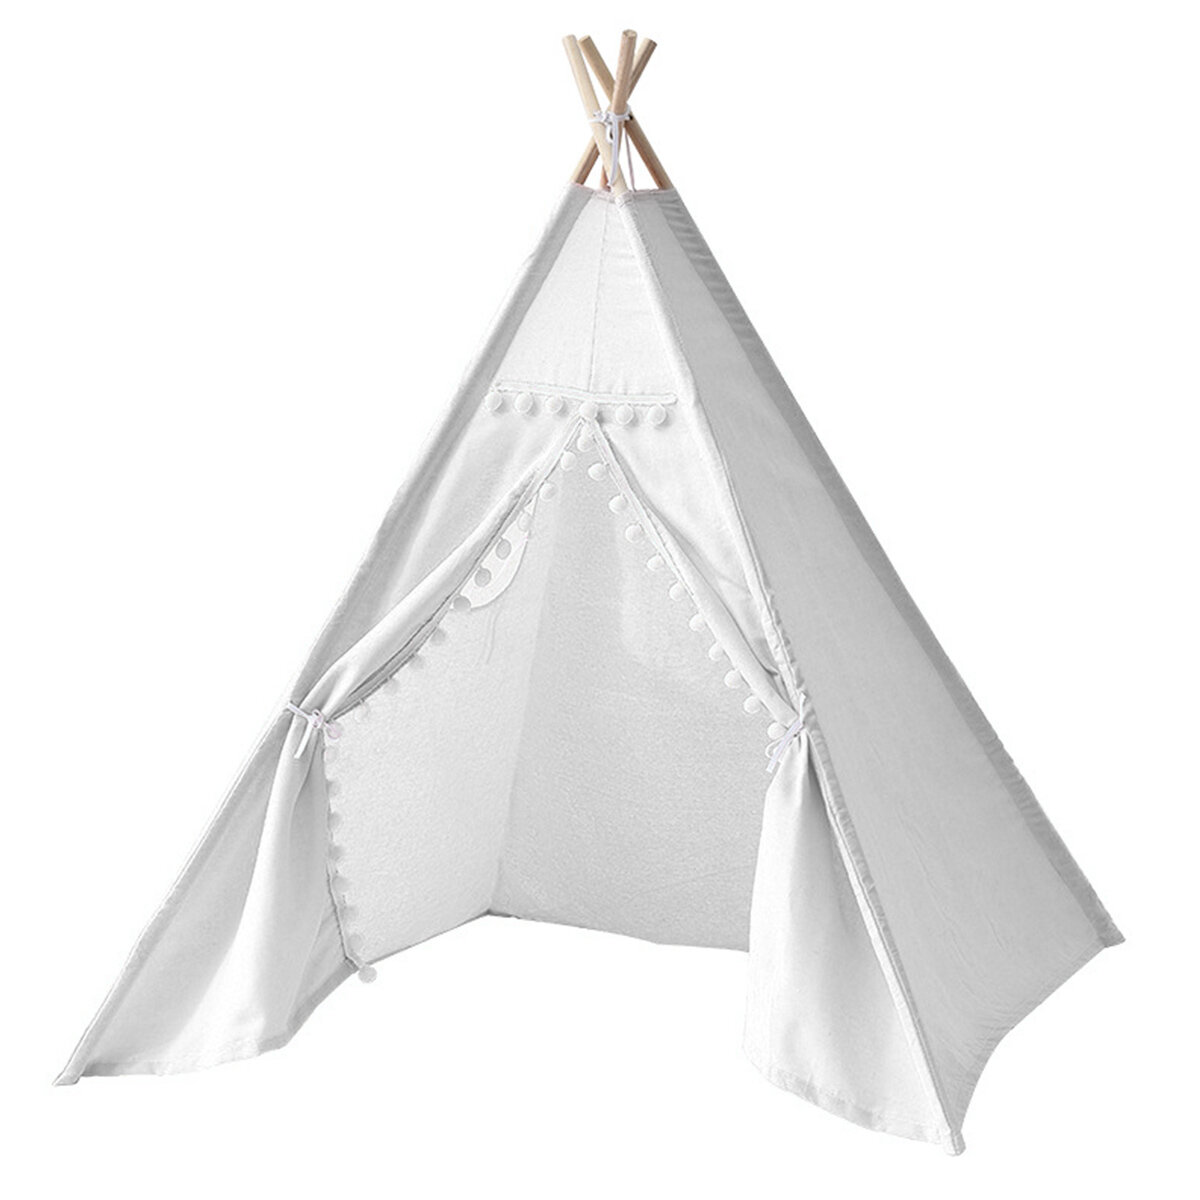 Image of 135M-18M Baby Tents Teepee Durable＆Quality Cotton Canvas Triangle Tent Kids Playhouse Pretend Indoor/Outdoor Play Tent